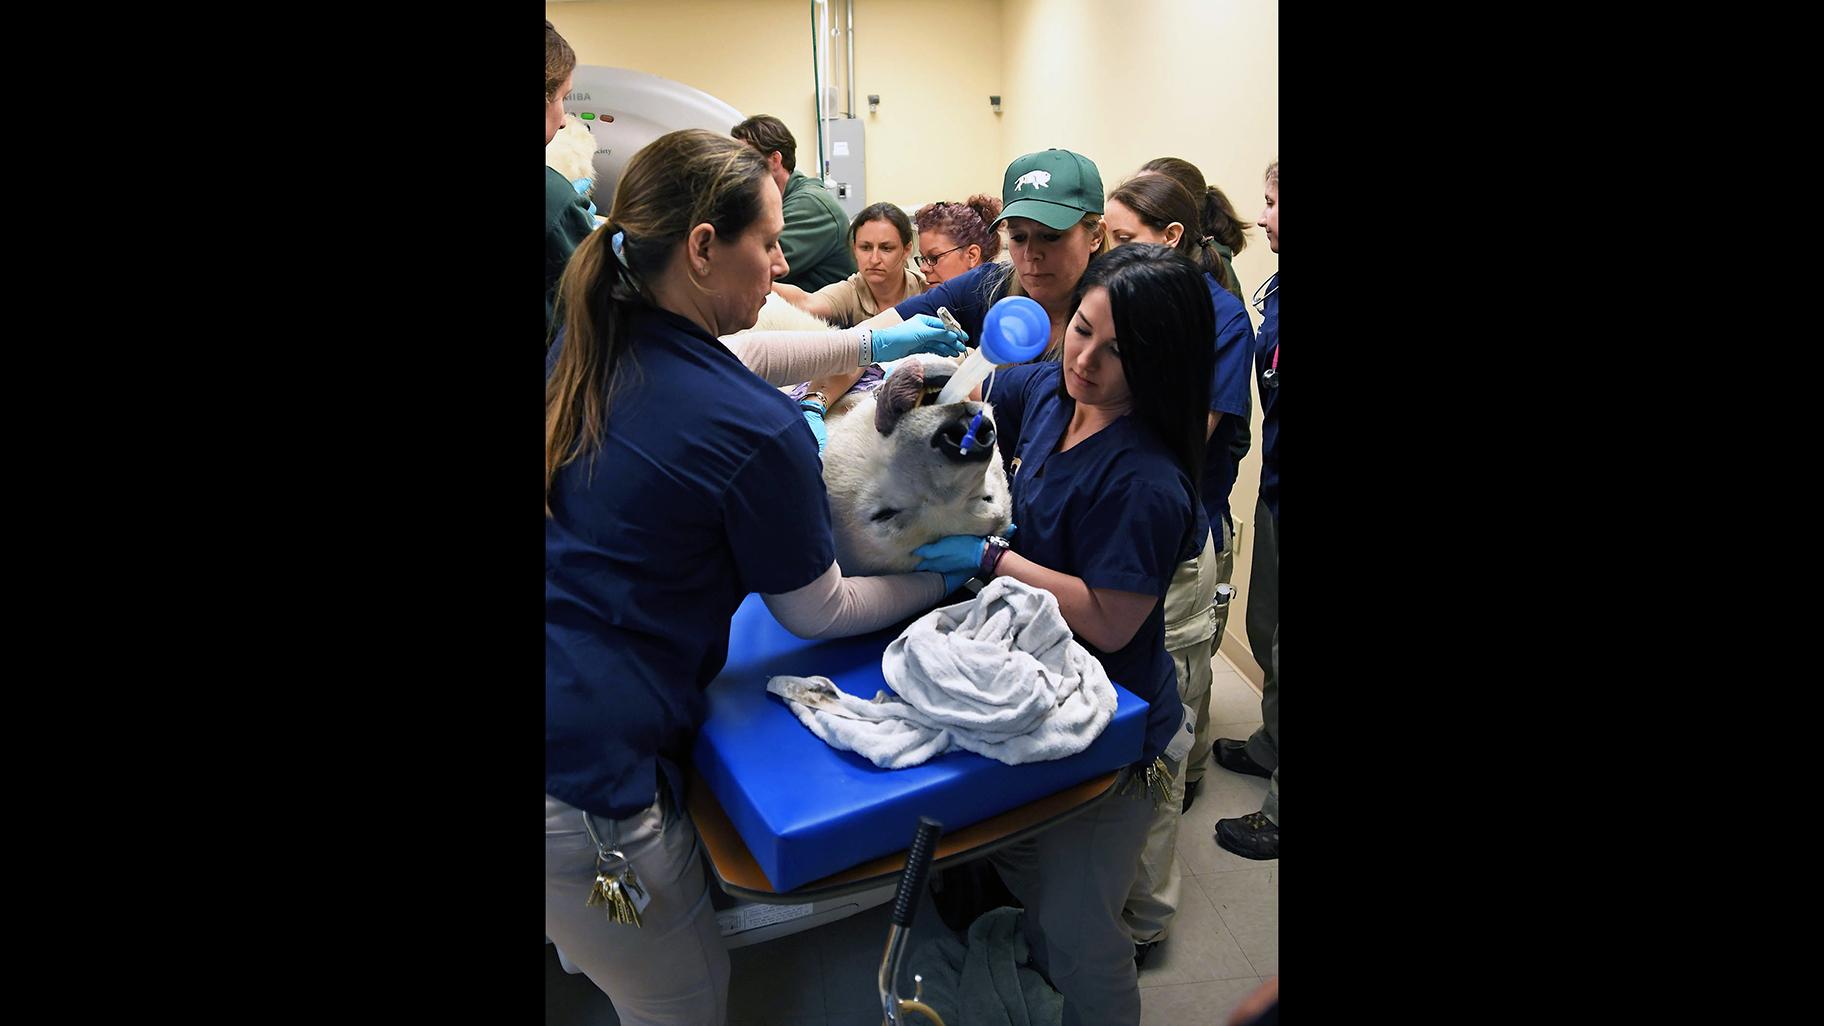 Using a new table that interfaces with Brookfield Zoo’s CT scanner, veterinary staff positioned Hudson, a 12-year-old male polar bear, for a CT scan. (Jim Schulz / Chicago Zoological Society)